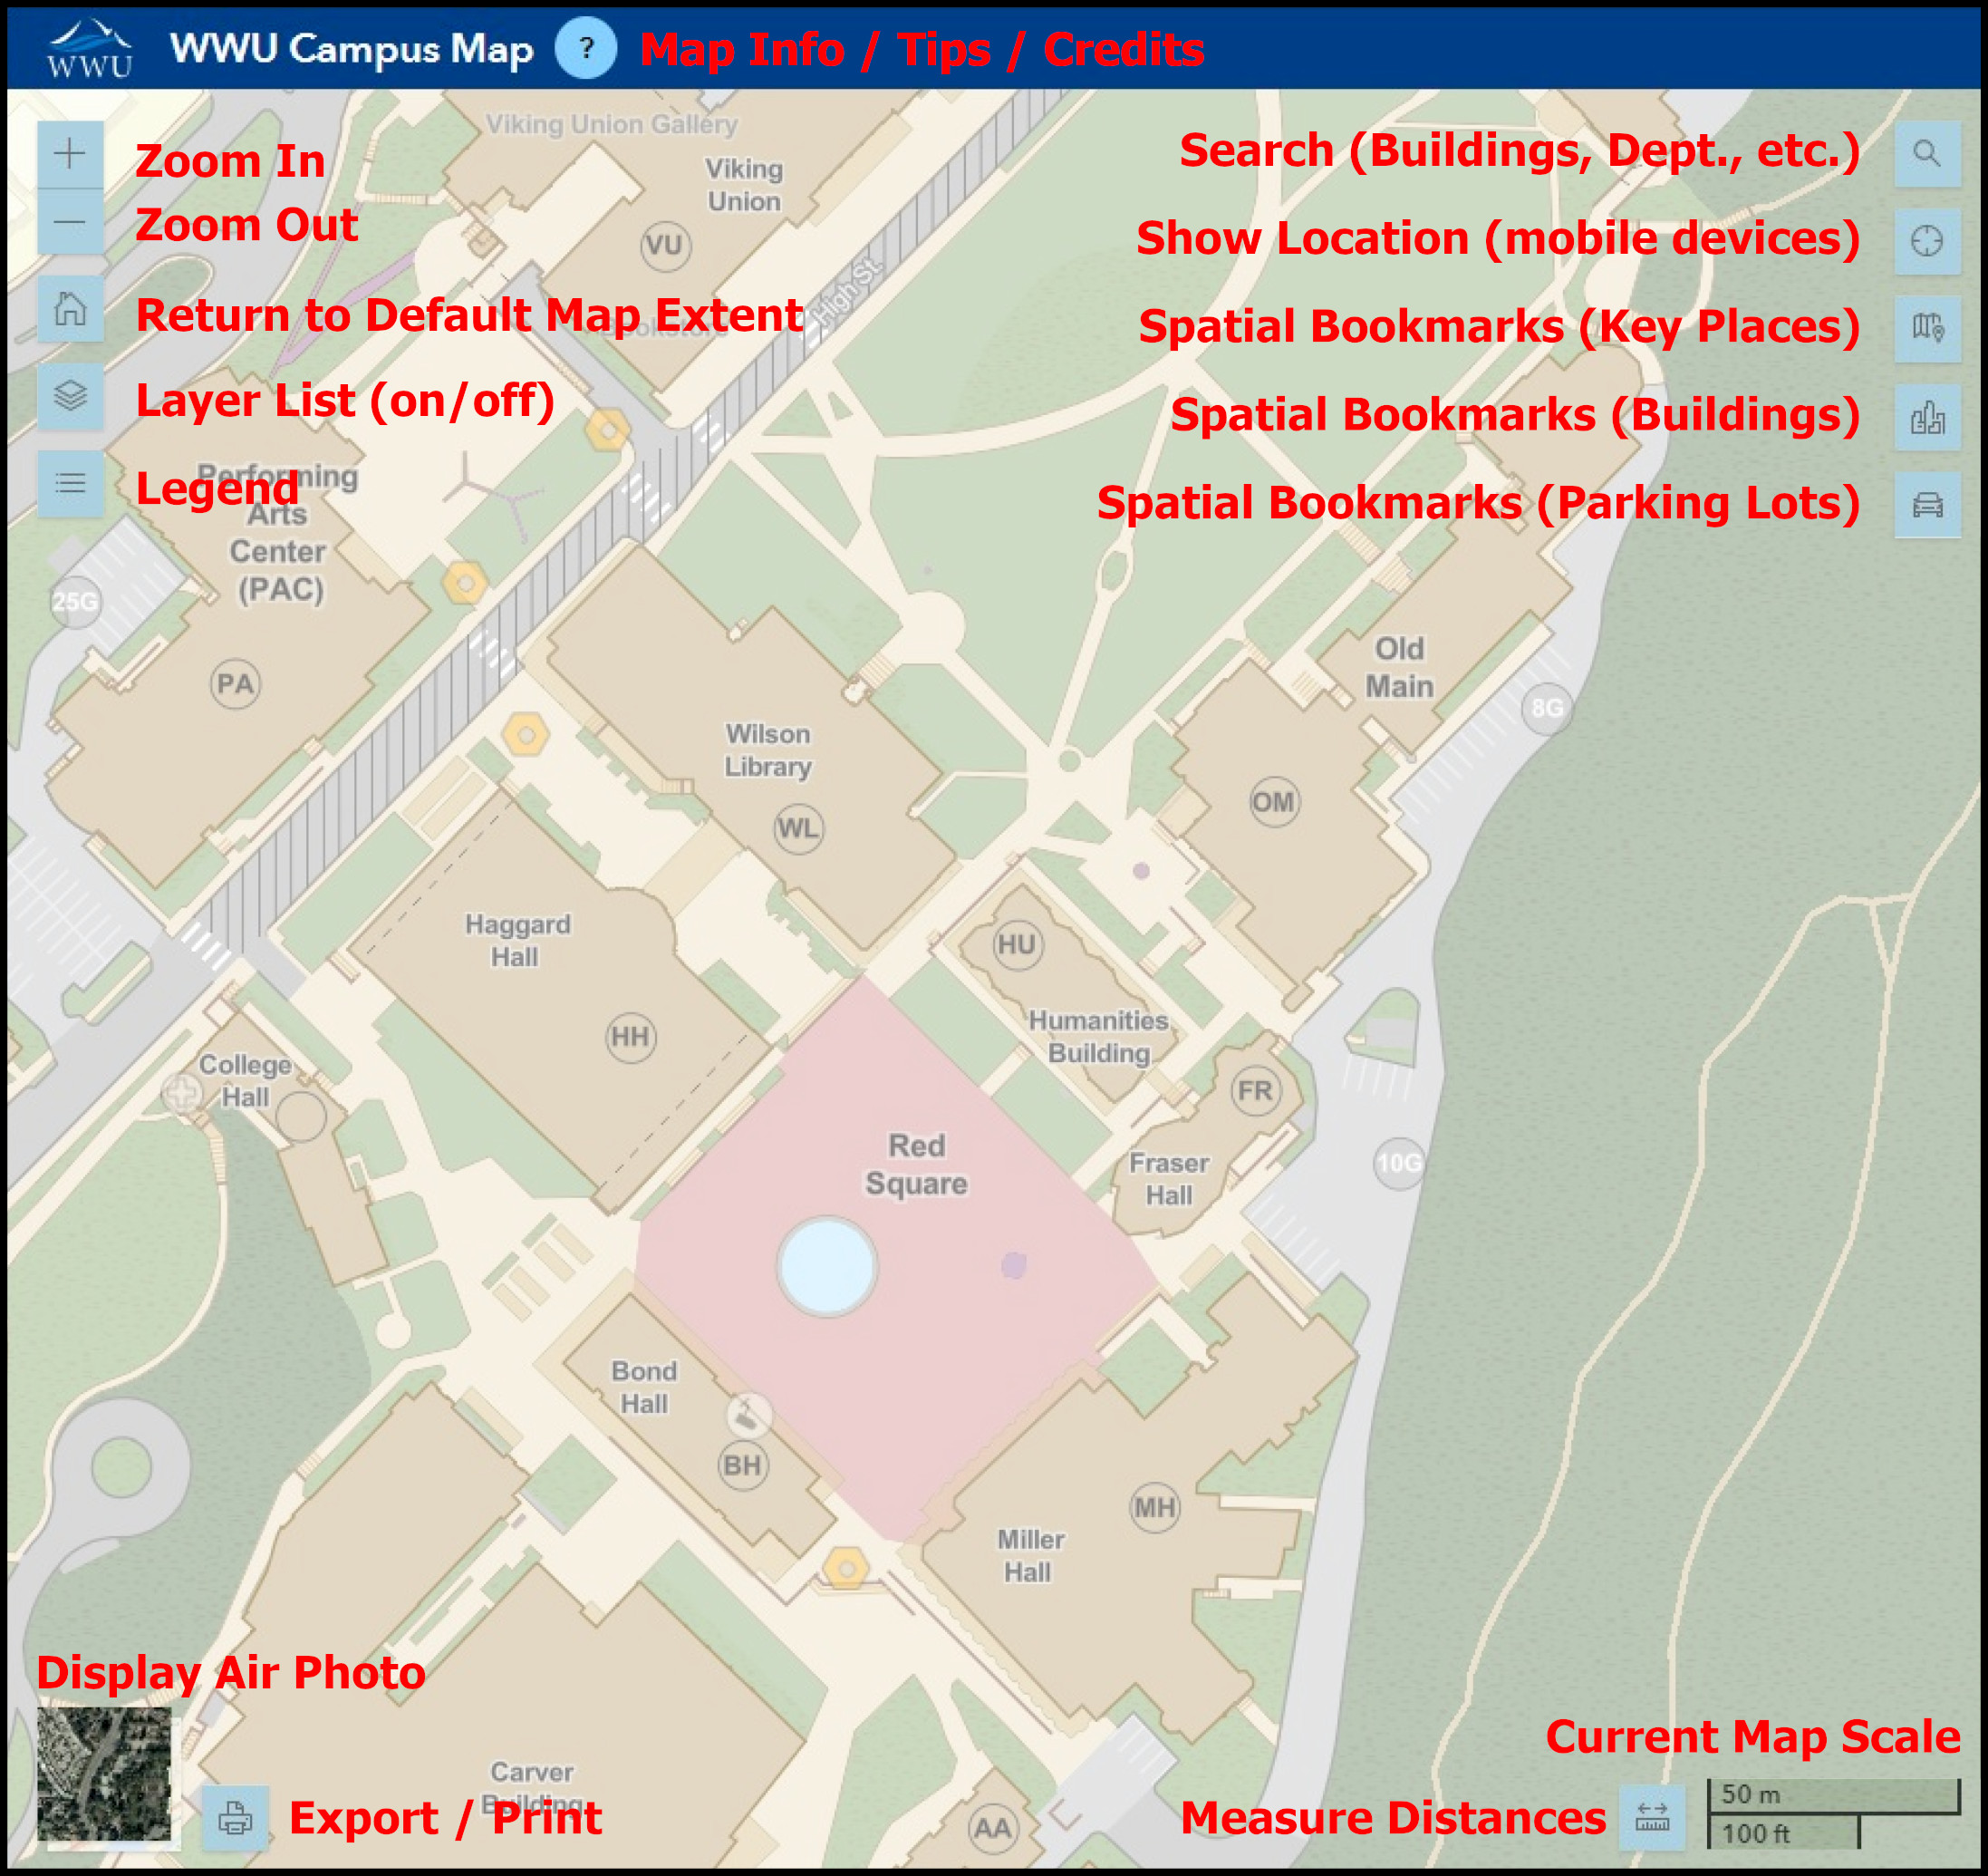 Annotated screenshot of WWU Campus Map user interface.